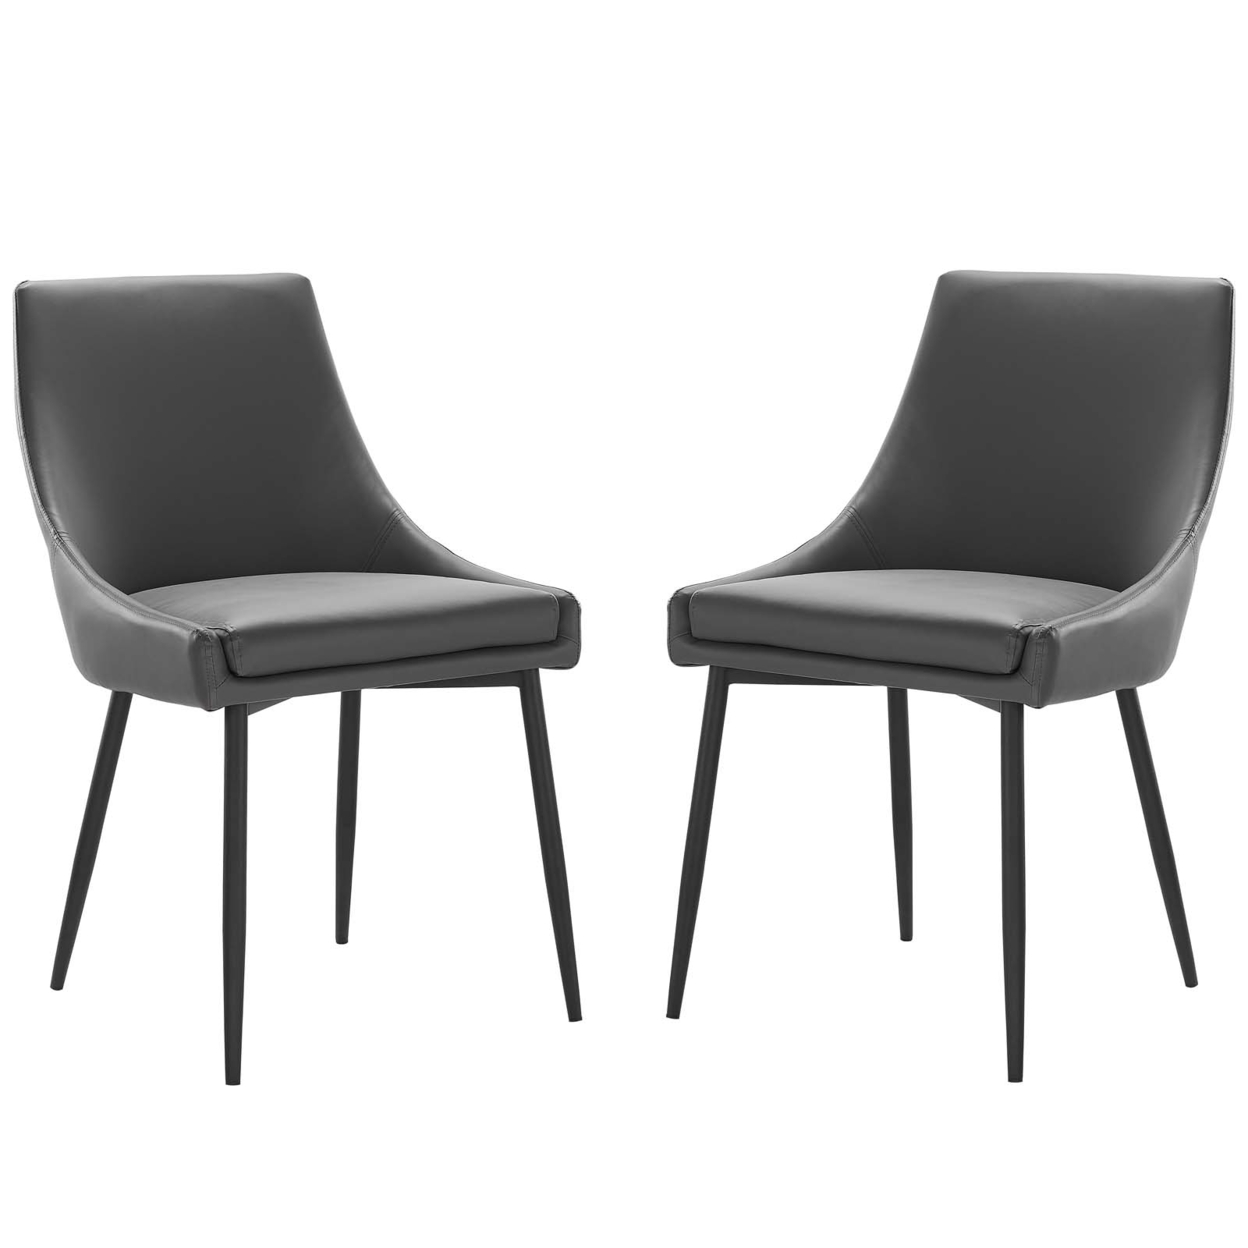 Viscount Vegan Leather Dining Chairs - Set Of 2, Black Gray